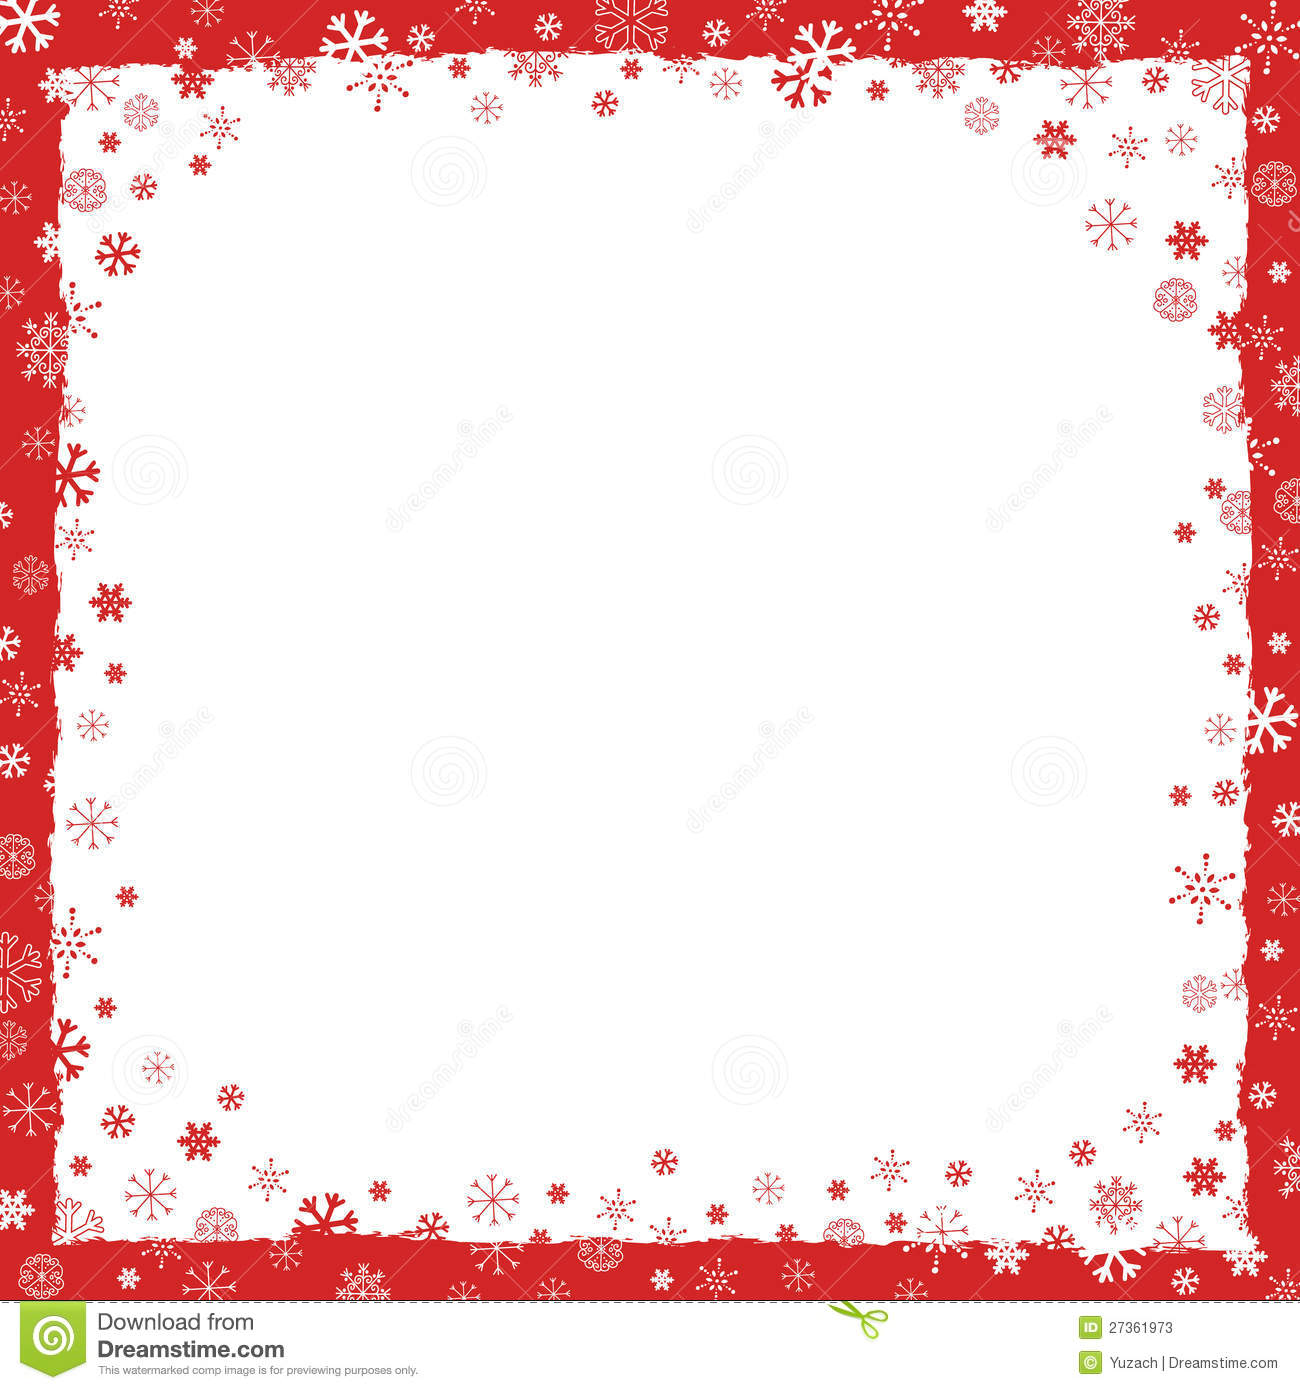 New Year  Christmas  Background With Snowflakes Border And Grunge    